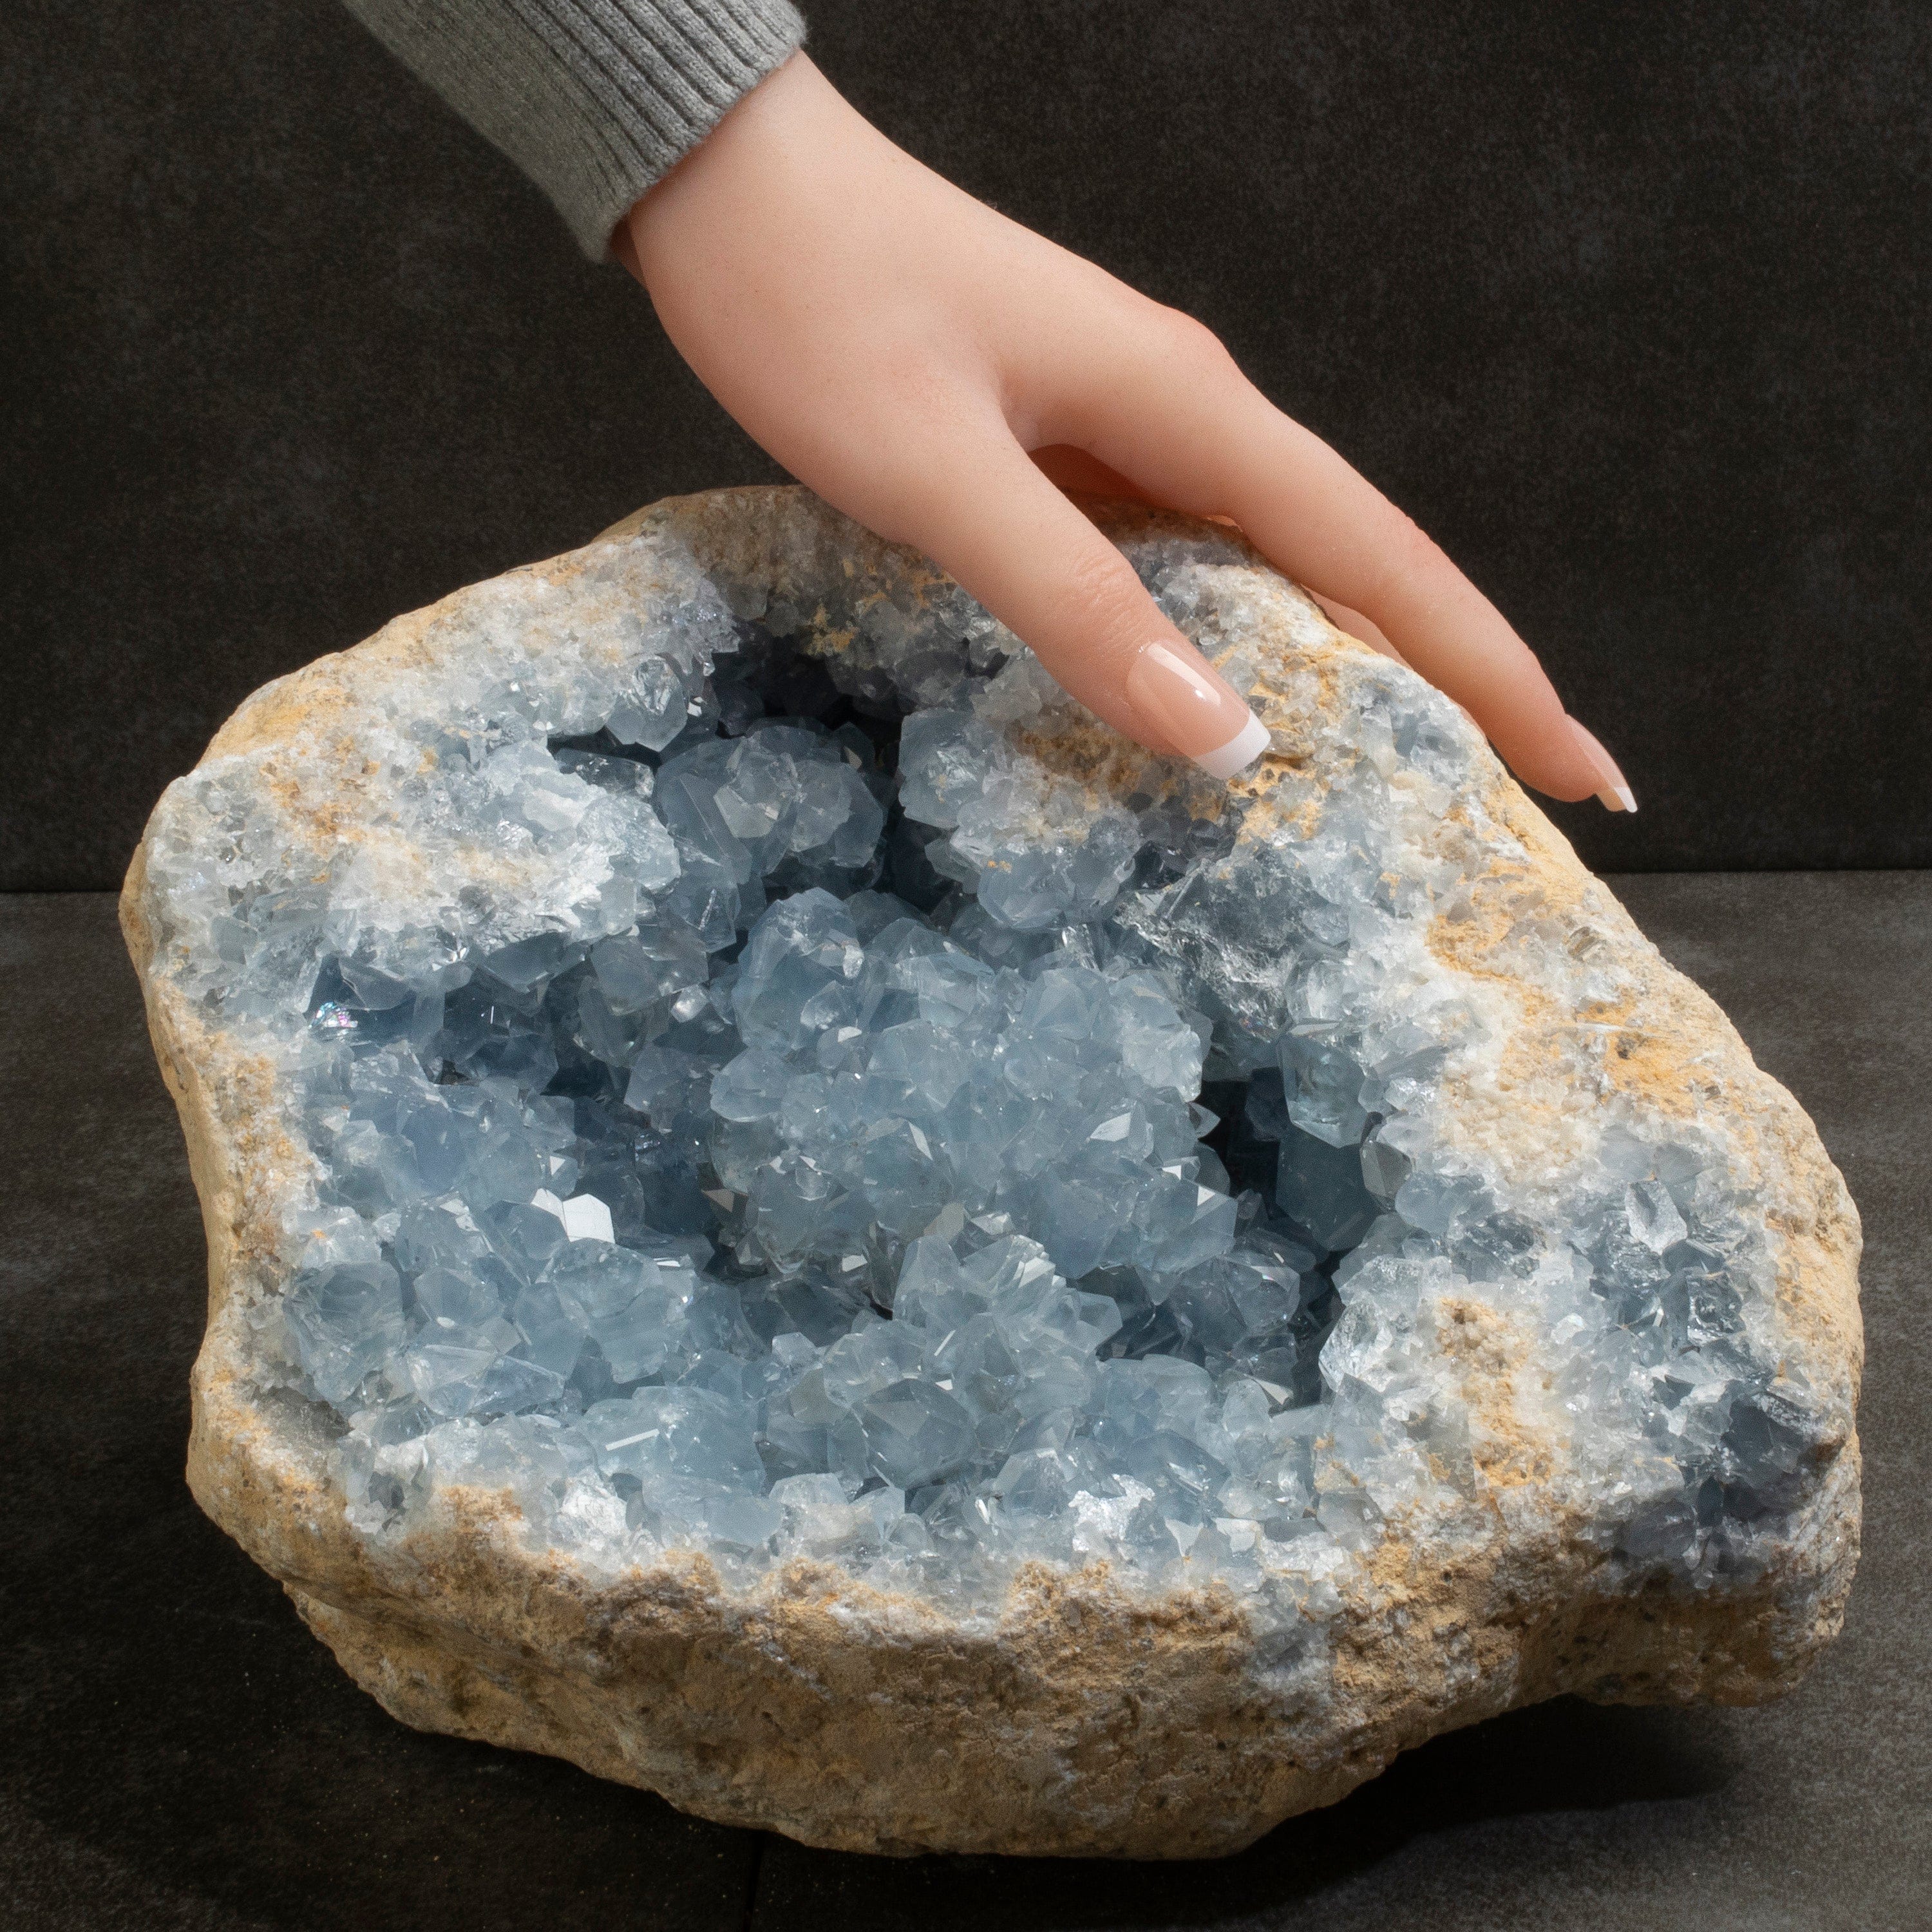 Kalifano Celestite Natural Celestite Crystal Cluster Geode from Madagascar - 9.5 in. CG3500.001